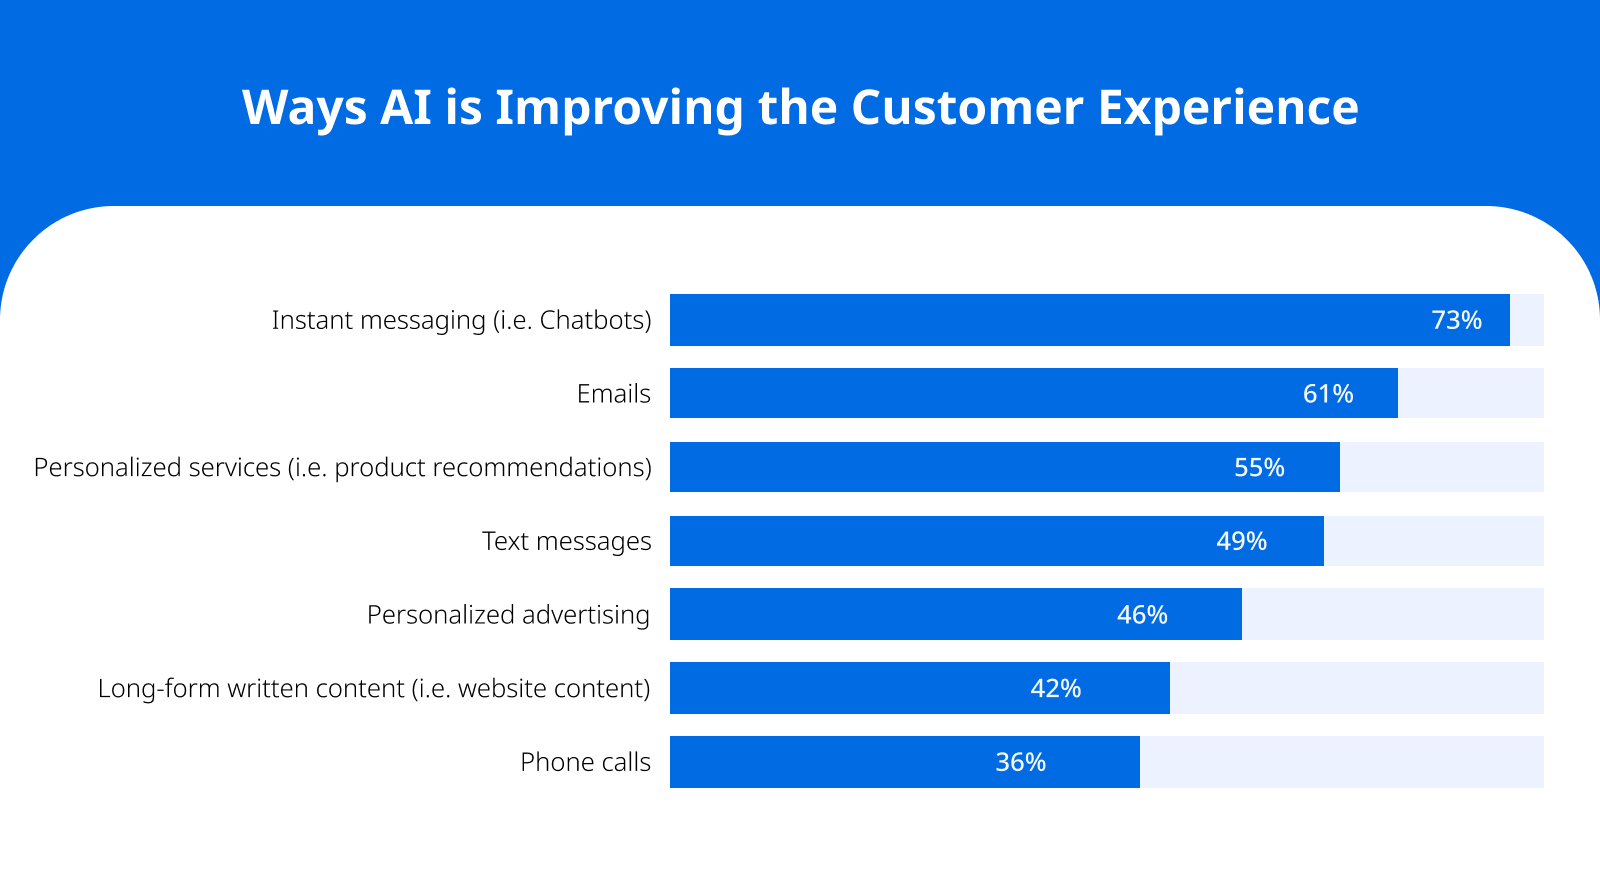 Ways AI is Improving the Customer Experience